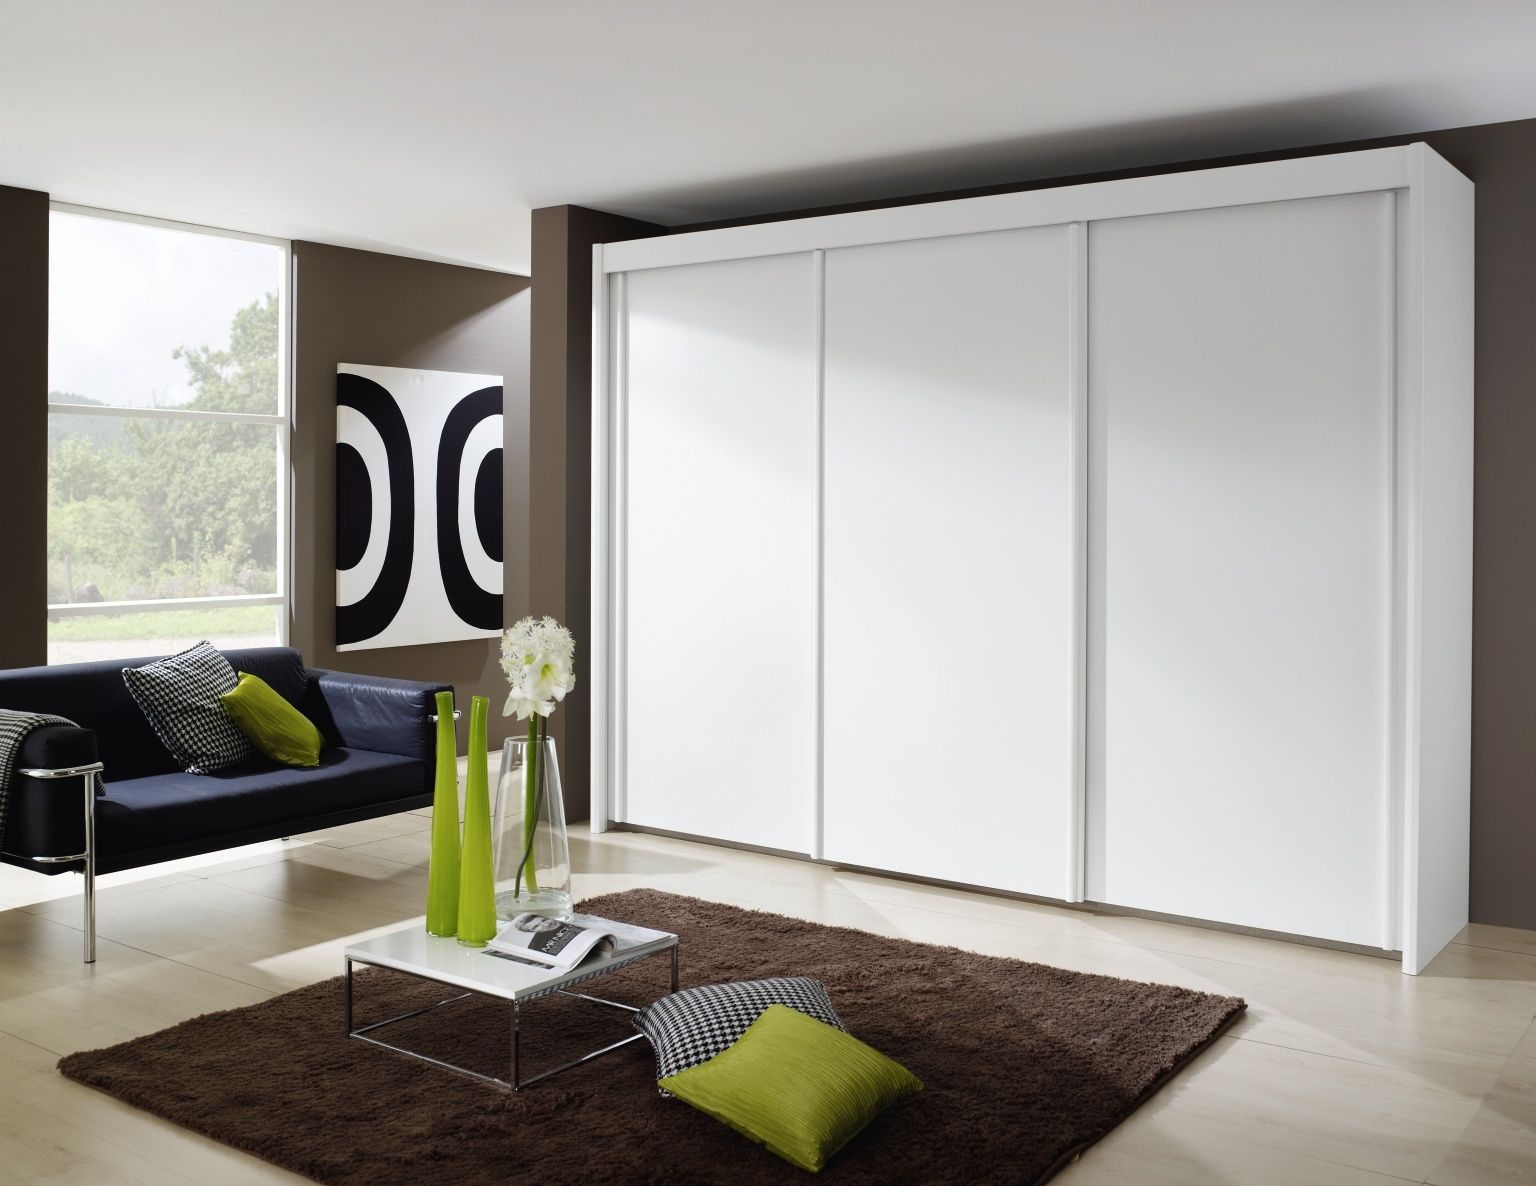 Rauch Imperial 3 Door Sliding Wardrobe In White – W 280cm – Cfs Furniture Uk Inside Rauch Imperial Wardrobes (View 9 of 15)